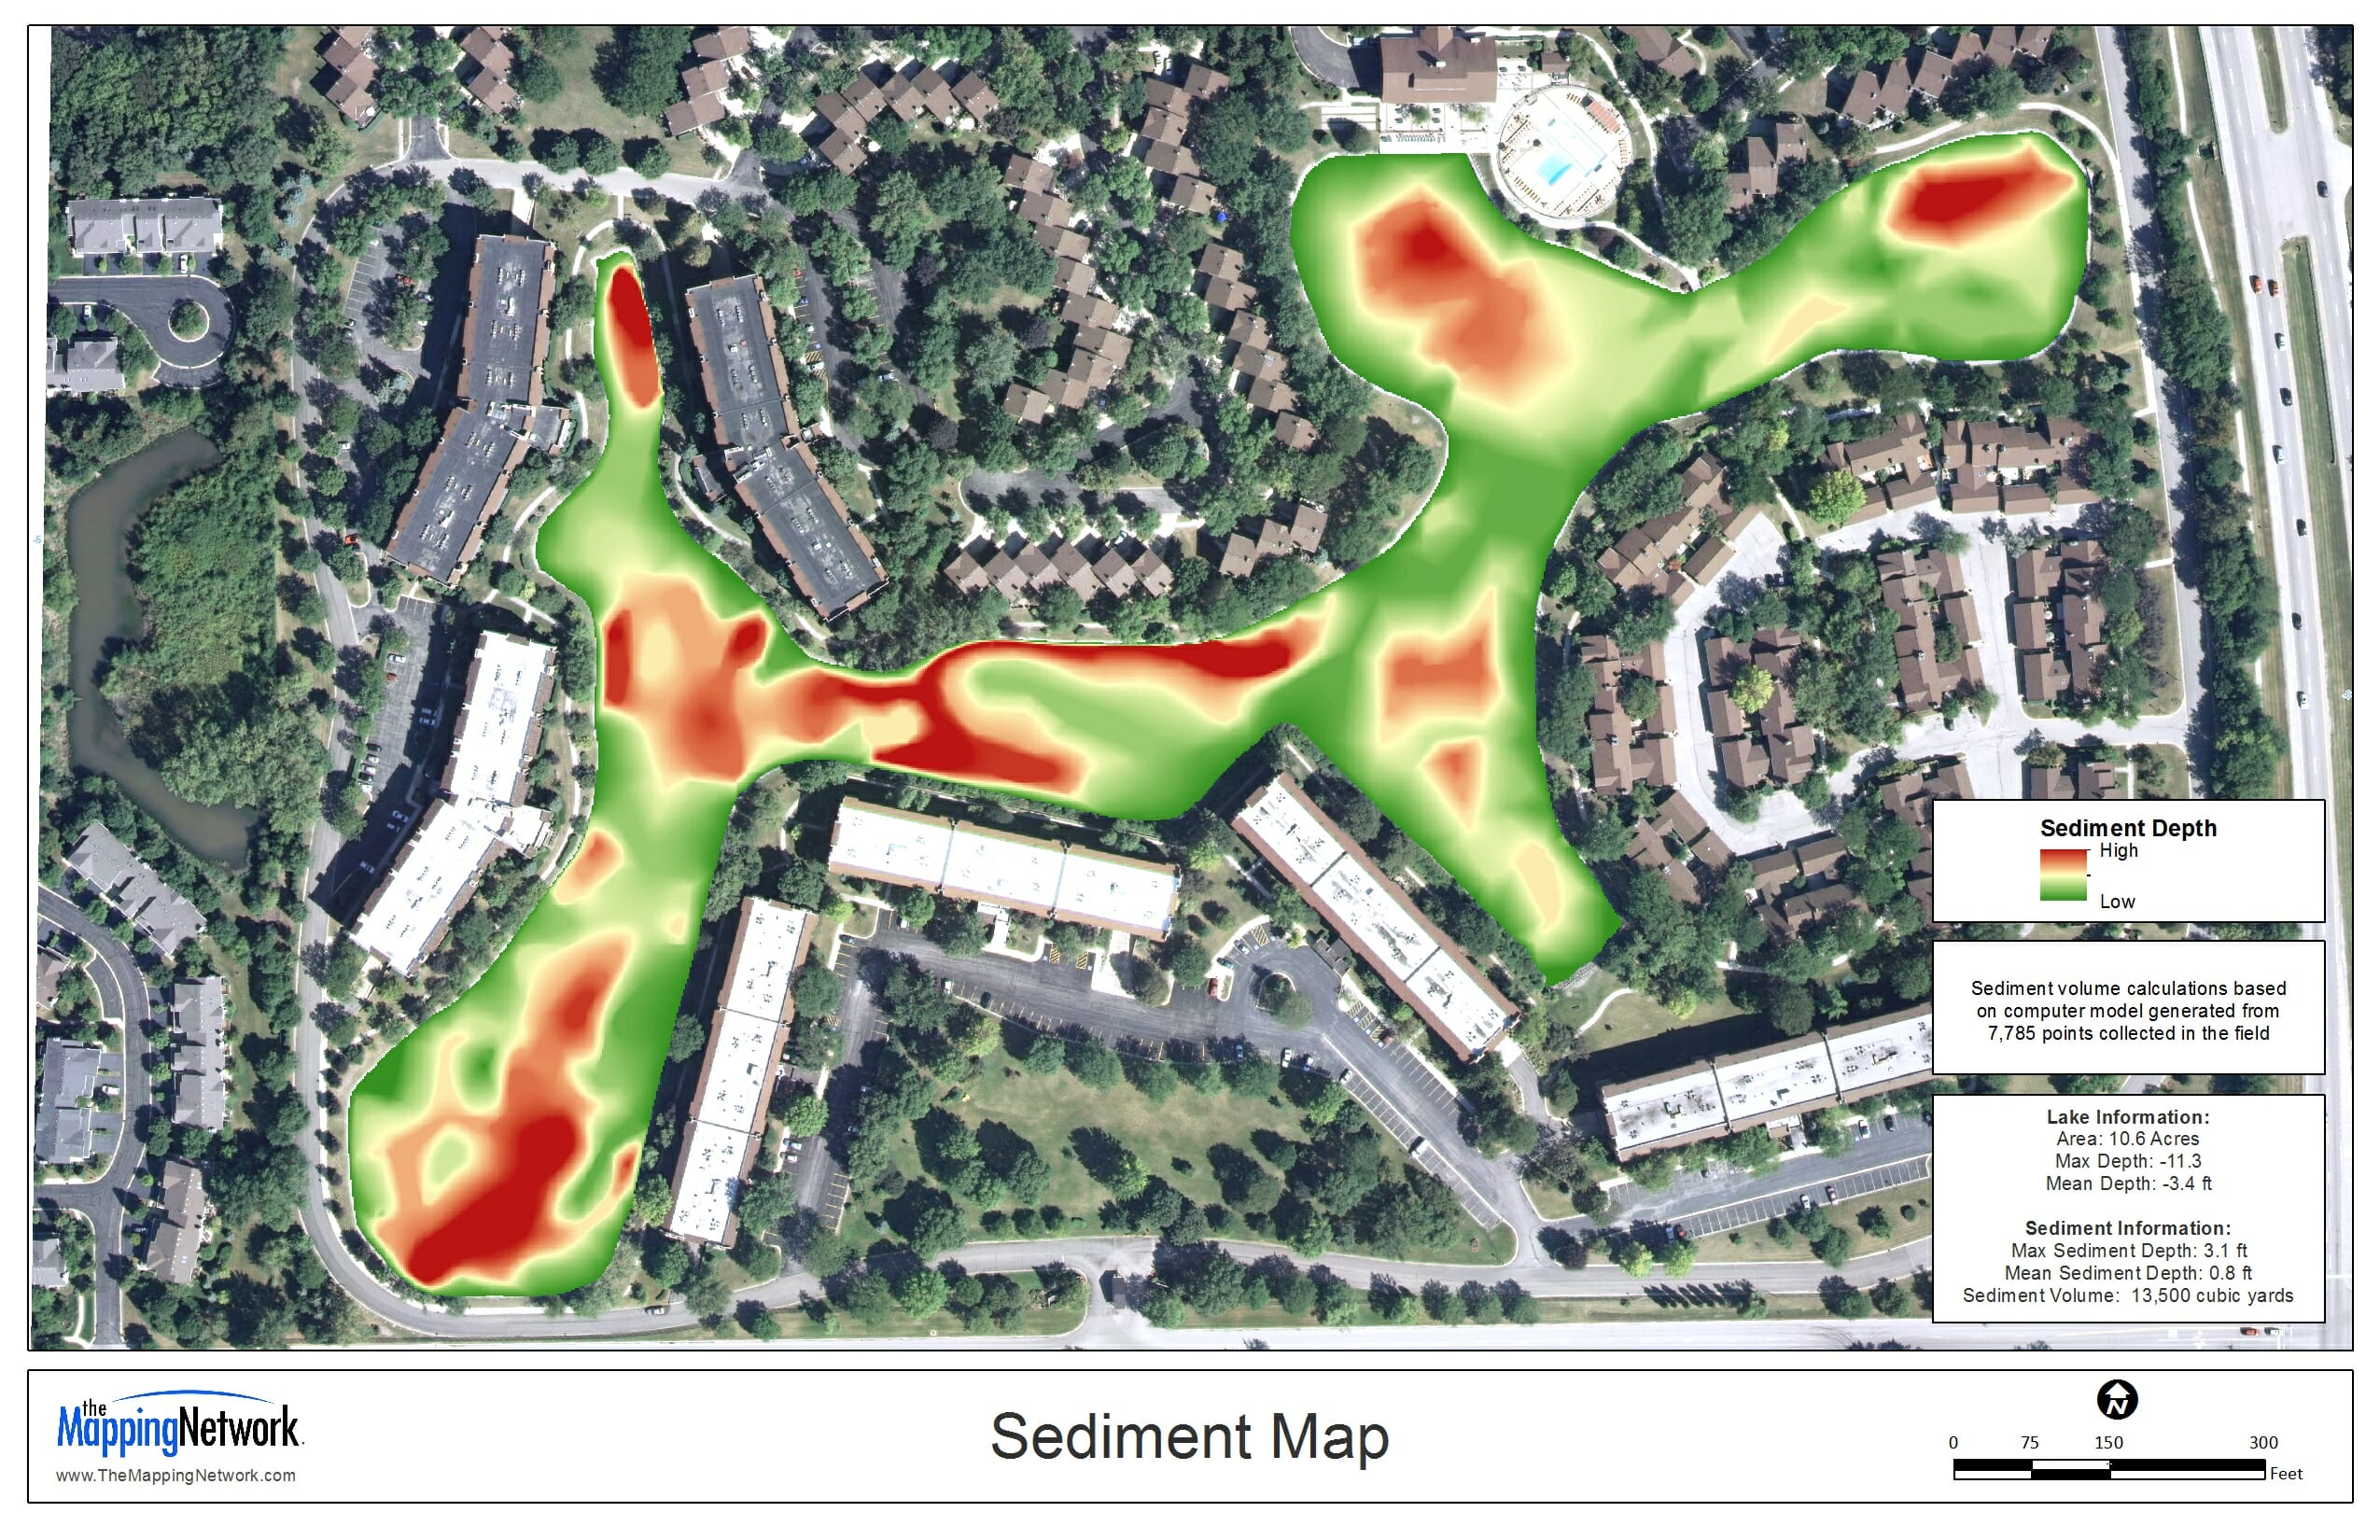 A color-shaded sediment map created by The Mapping Network.  Our automated sediment mapping system can precisely locate problems areas needing to be dredged.  Knowing exactly where to remove sediment not only saves the client money, but protects the envinoment by only distrurbing a small area.